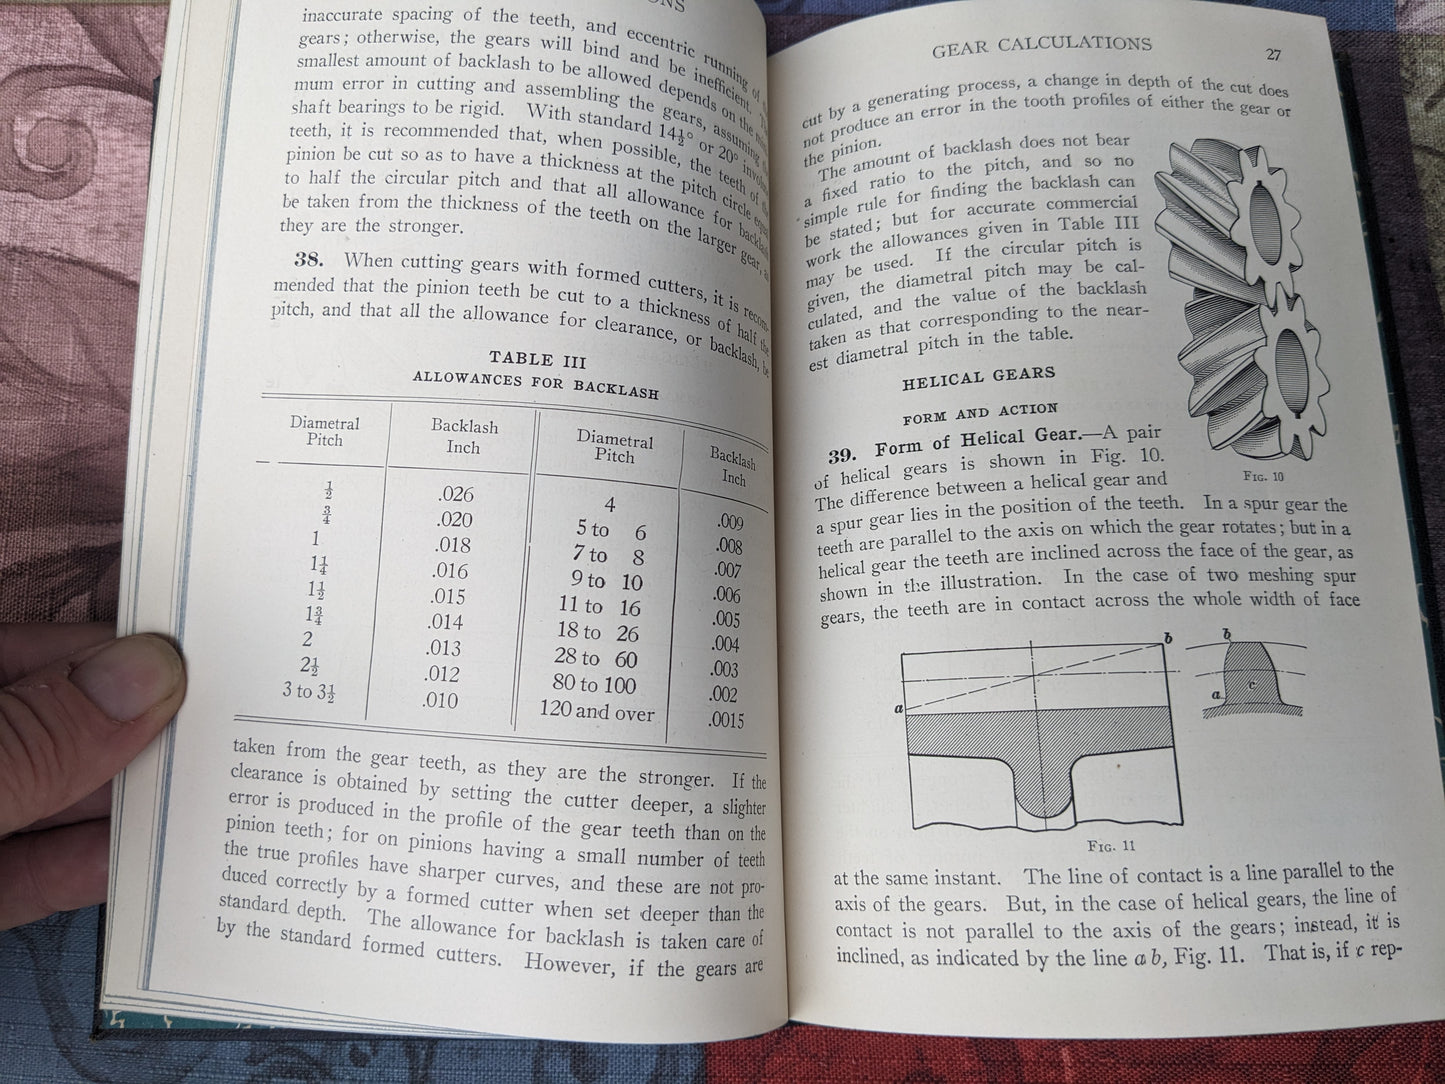 Gear Calculations and Cutting by International Textbook Company of Scranton, PA, 1934